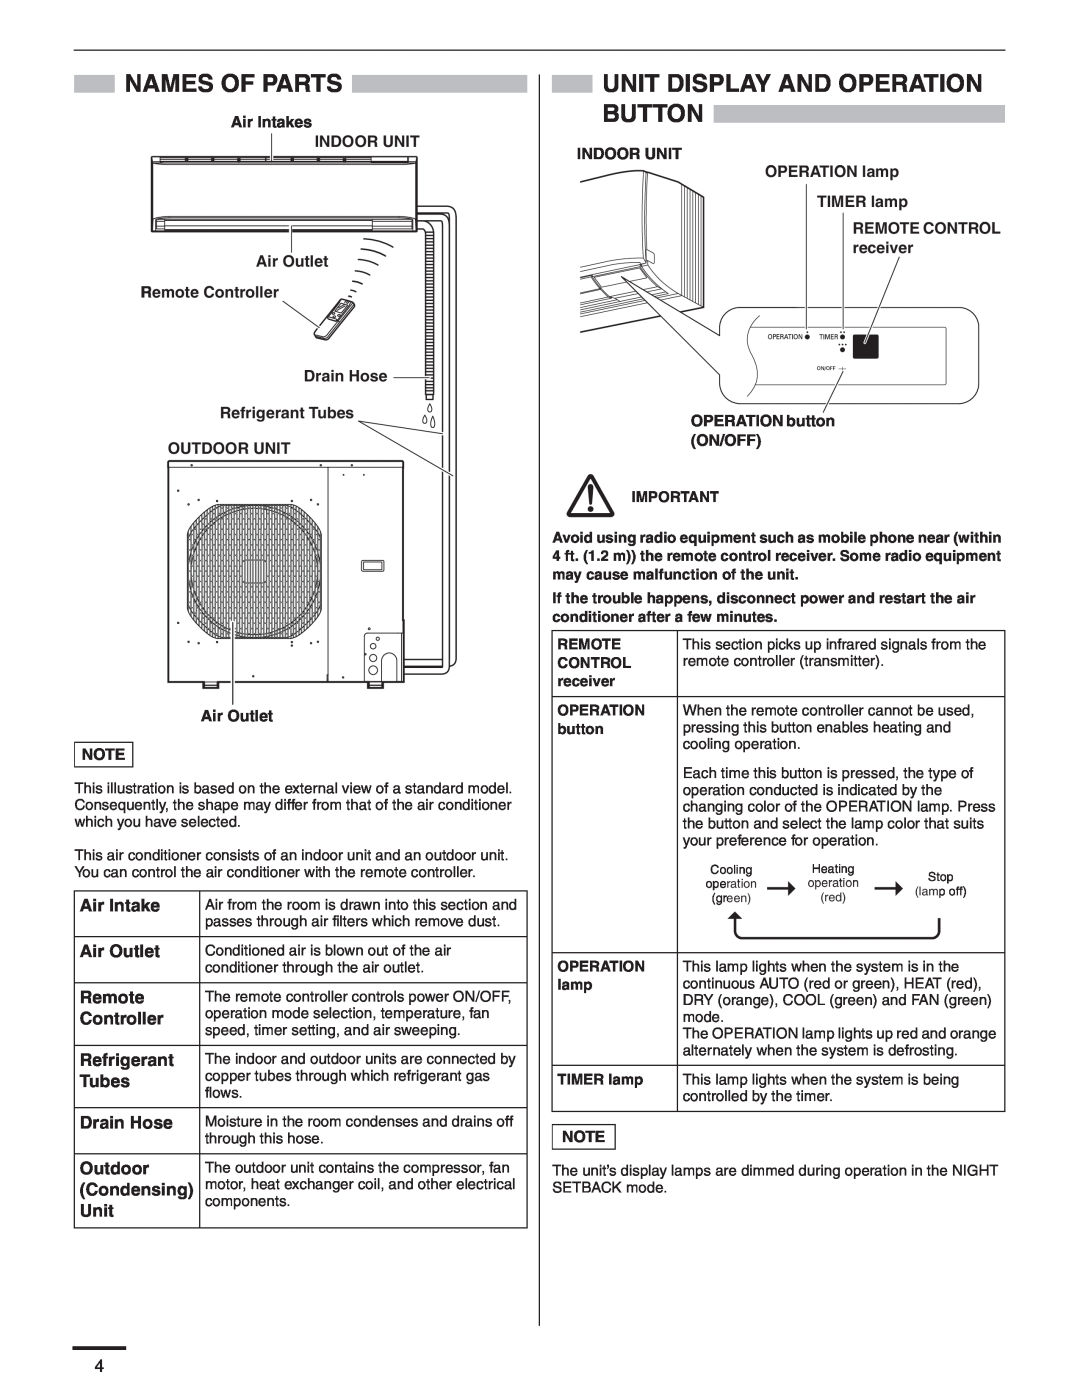 Panasonic CU-KE36NKU, CU-KE30NKU, CS-KE36NKU, CS-KE30NKU service manual Names Of Parts, Unit Display And Operation Button 